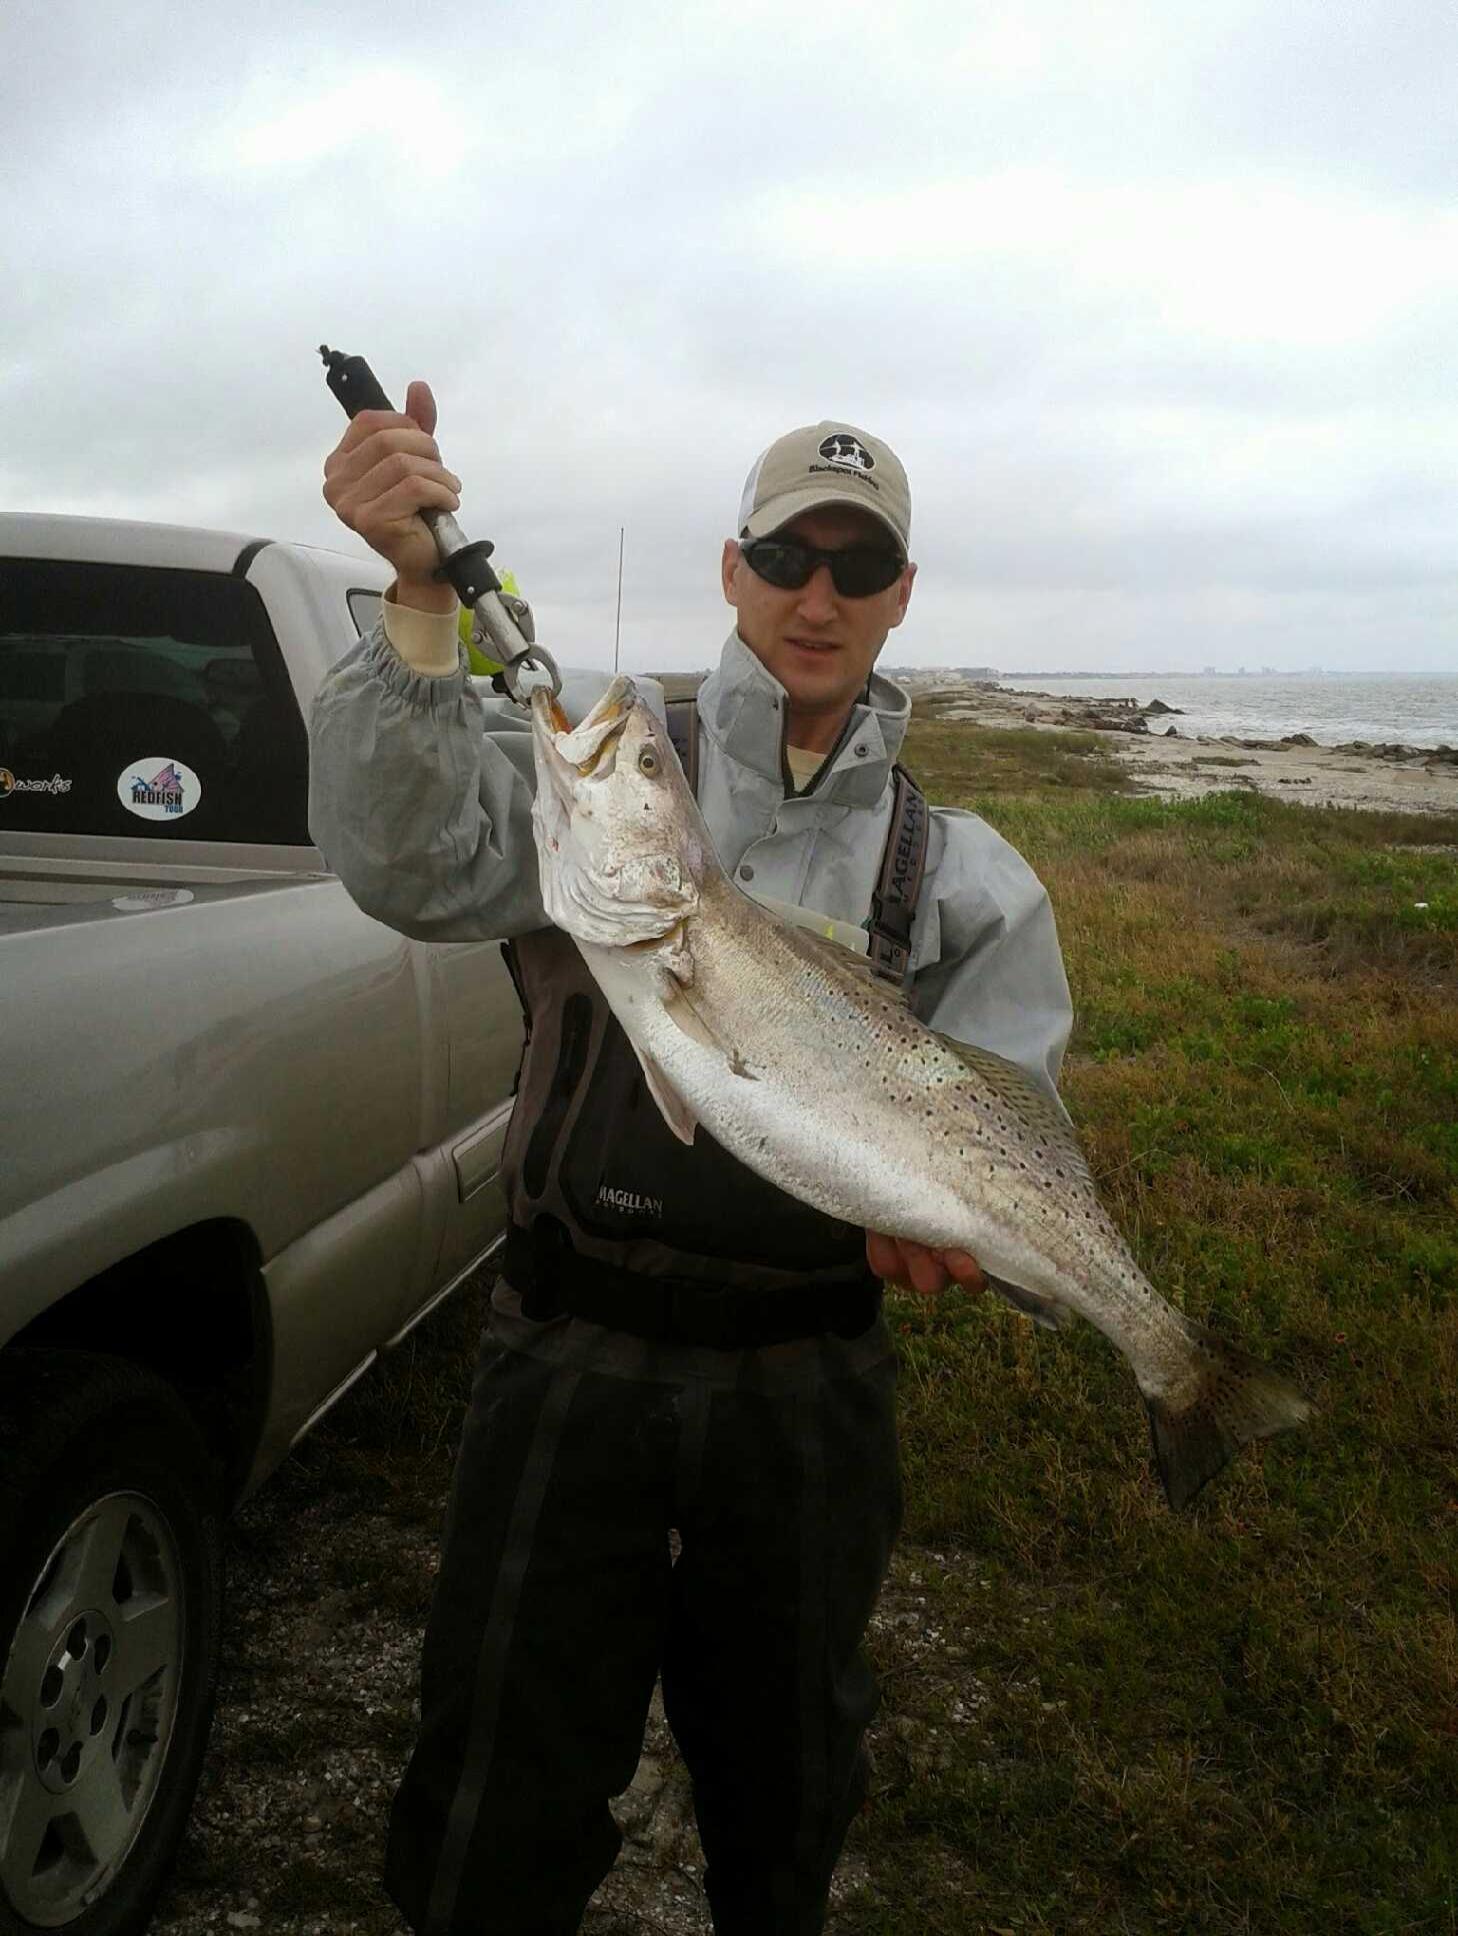 big speckled trout gator trout yellow mouth chris bush podcast inshore saltwater texas louisiana florida gulf coast